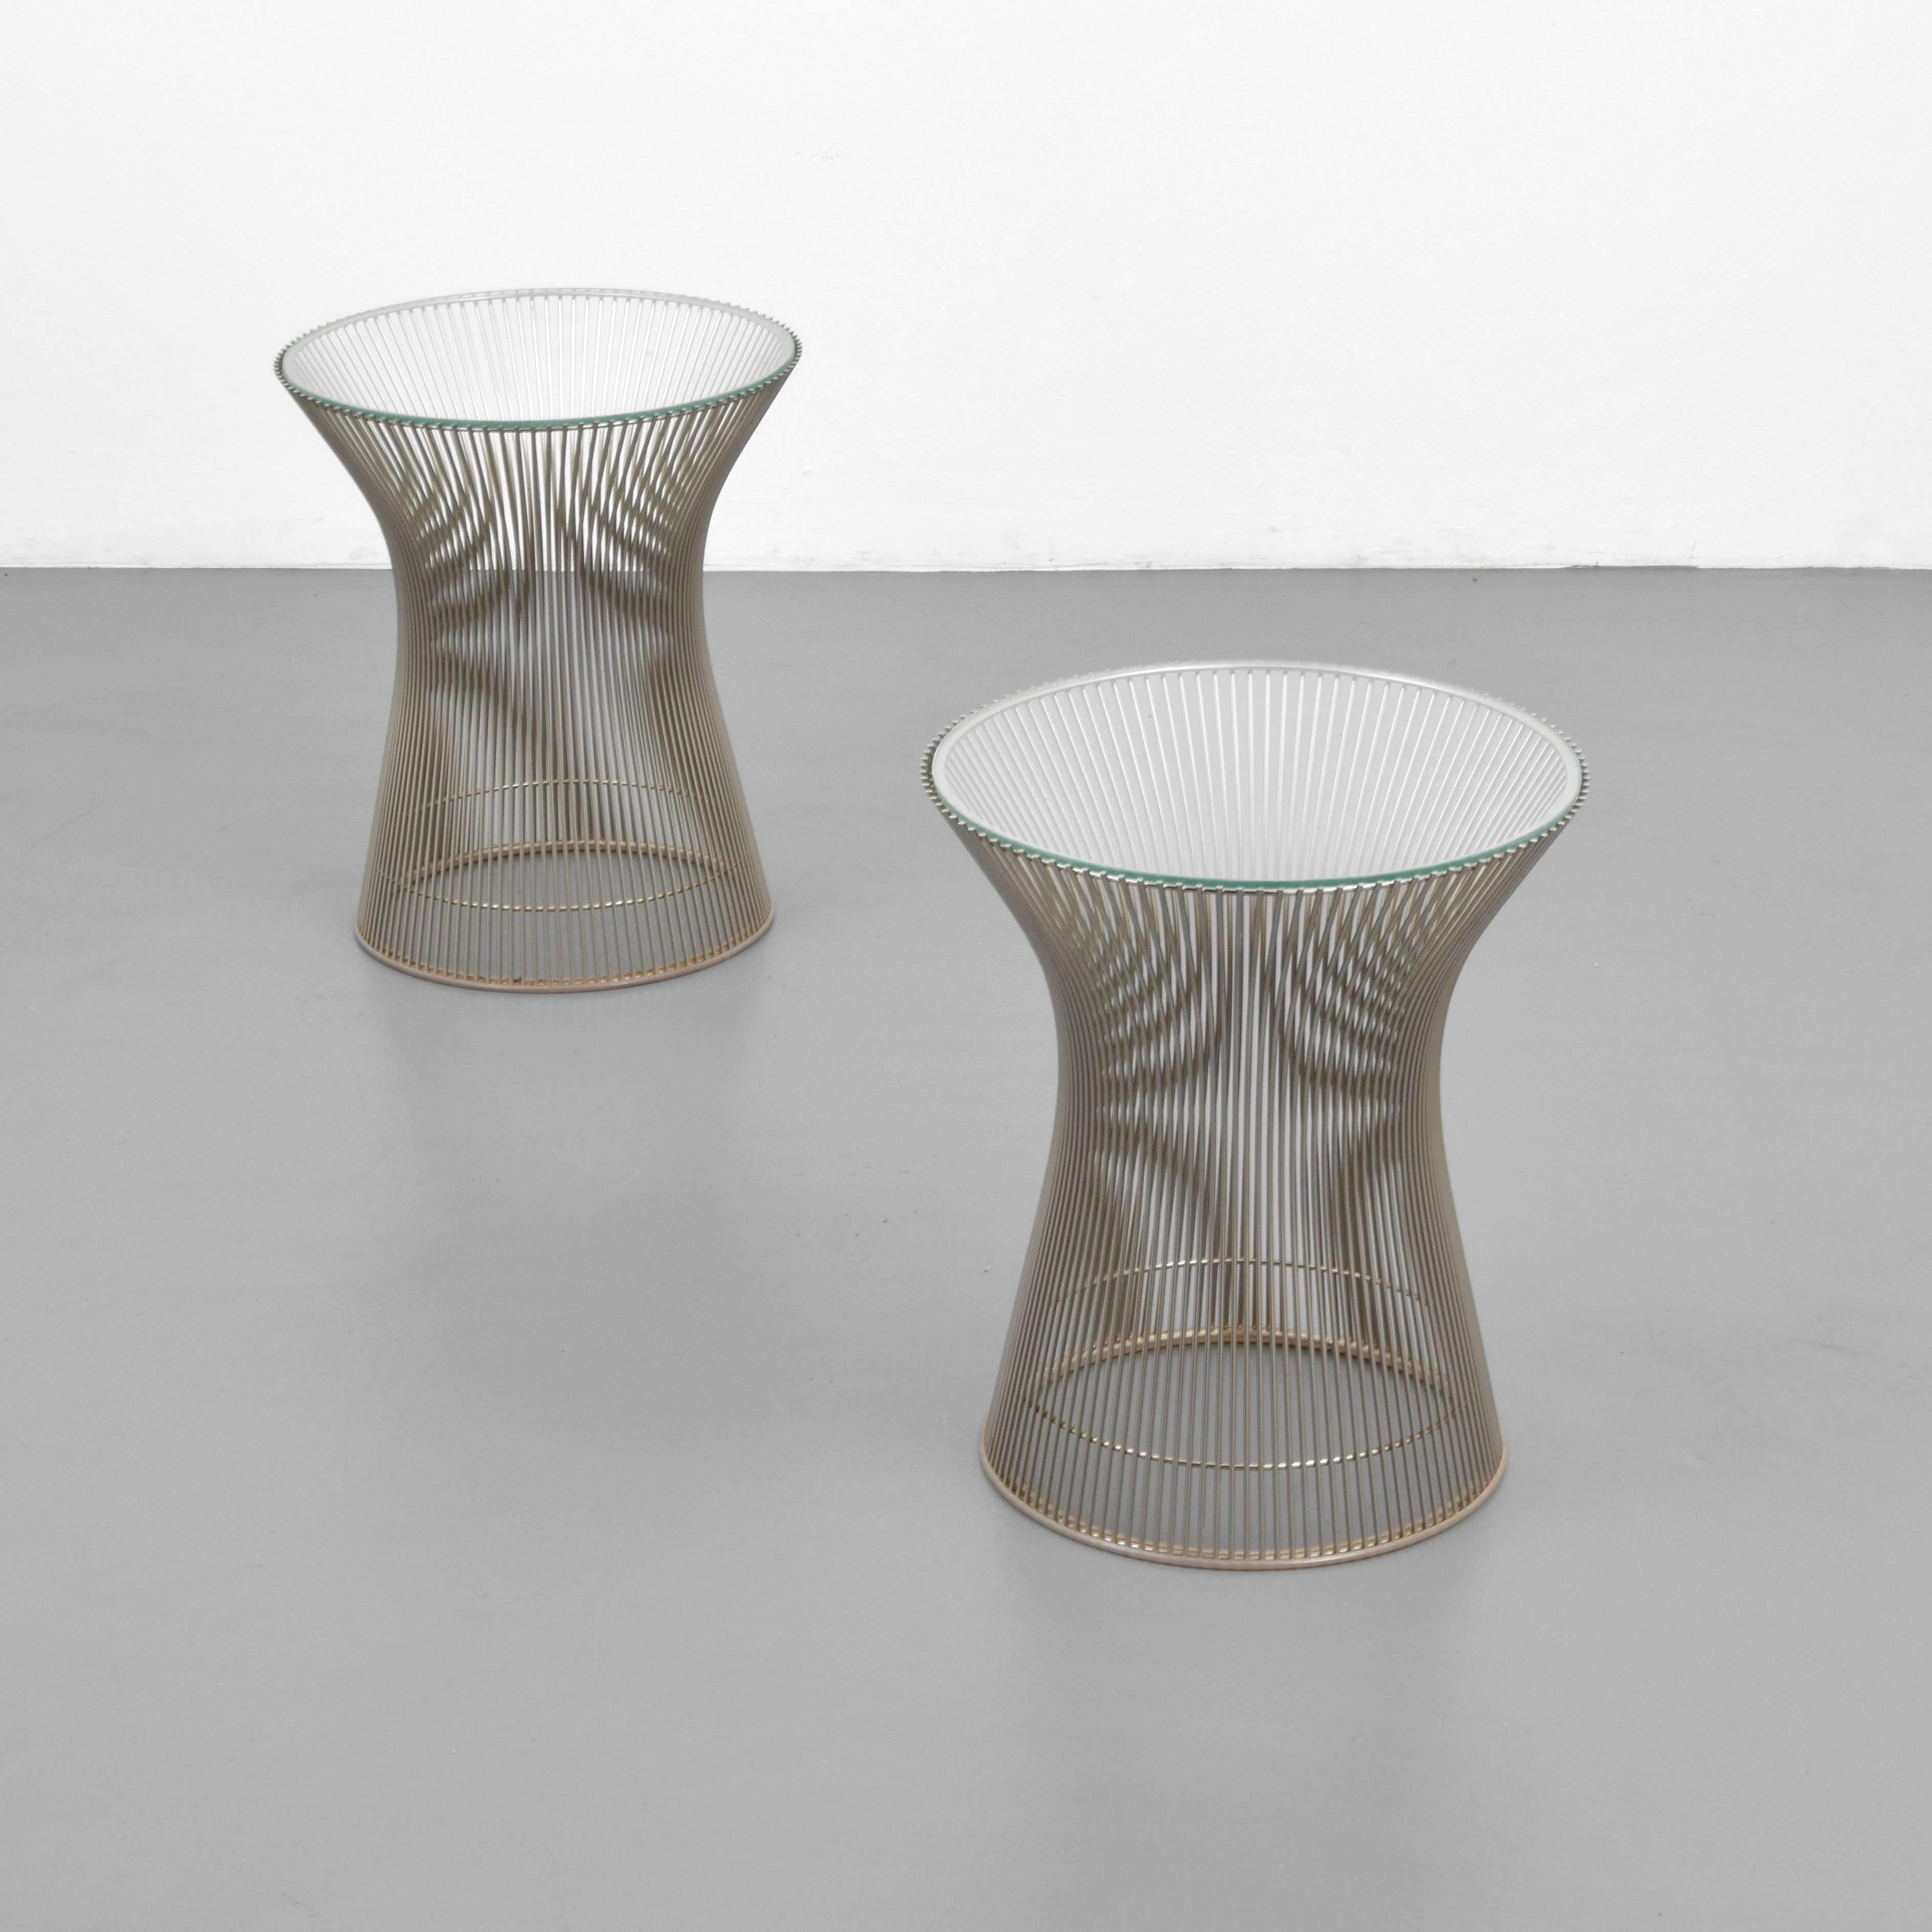 Pair of end/side tables by Warren Platner for Knoll. Reference: Knoll, A Modernist Universe, Brian Lutz, pg. 166.